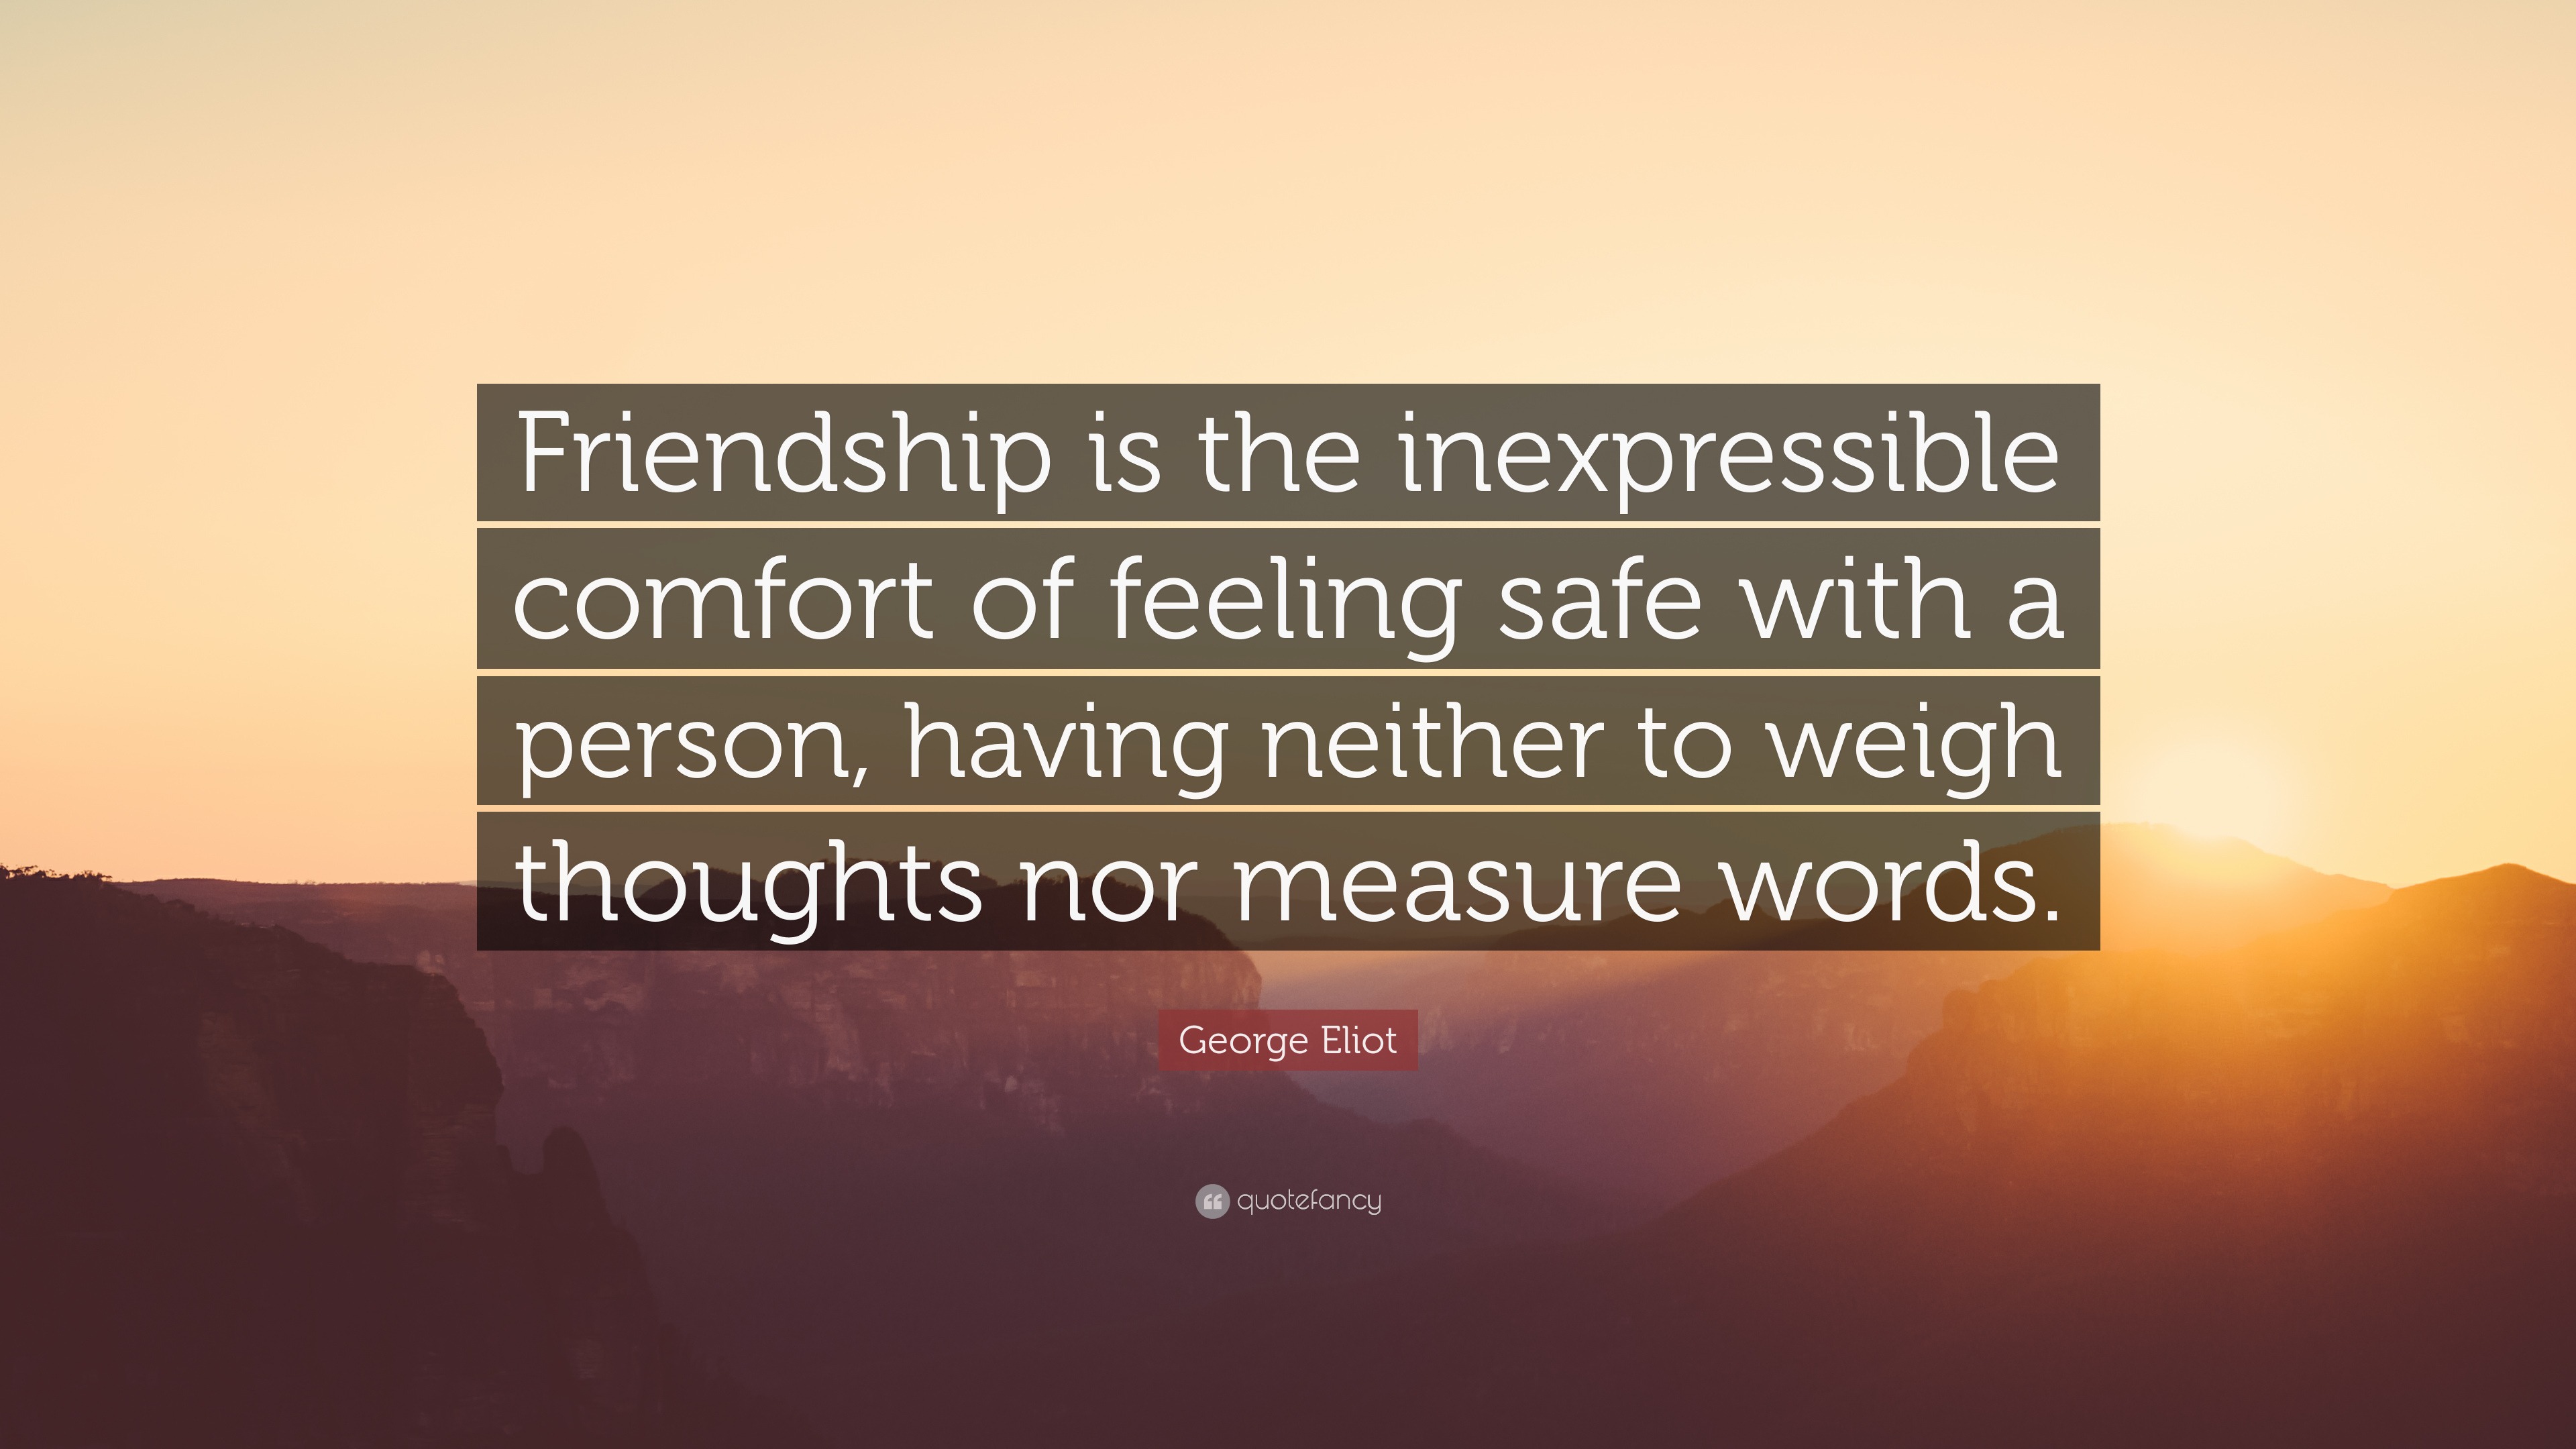 George Eliot Quote: “Friendship is the inexpressible comfort of feeling